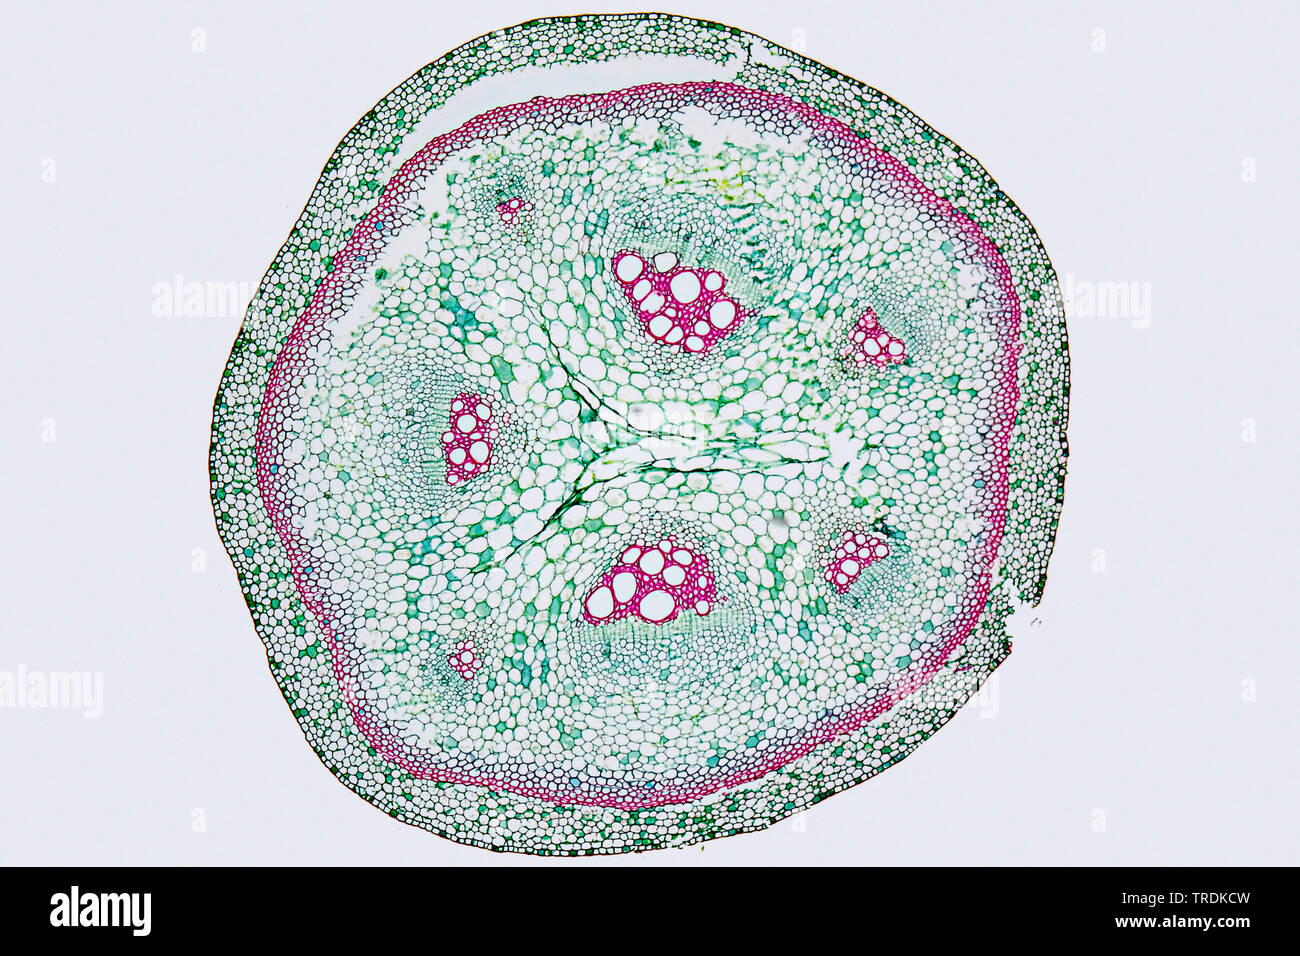 dutchman's pipe, pipe vine (Aristolochia macrophylla, Aristolochia sipho), cross section of a sprout, x 12 Stock Photo